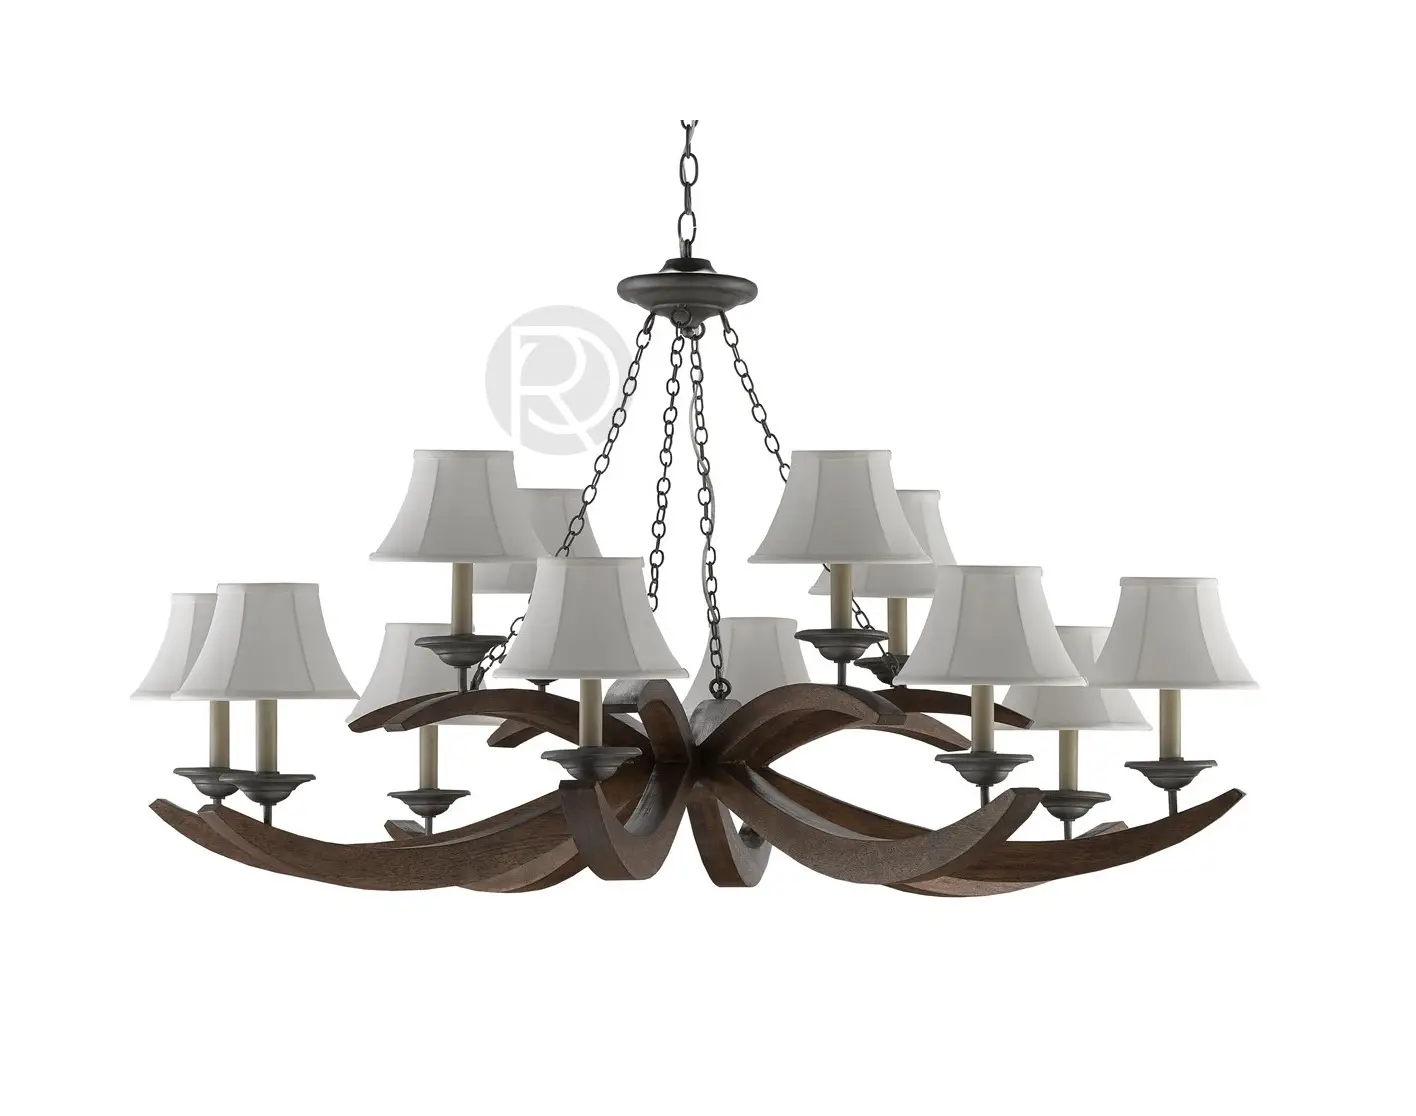 WHITLOW Chandelier by Currey & Company